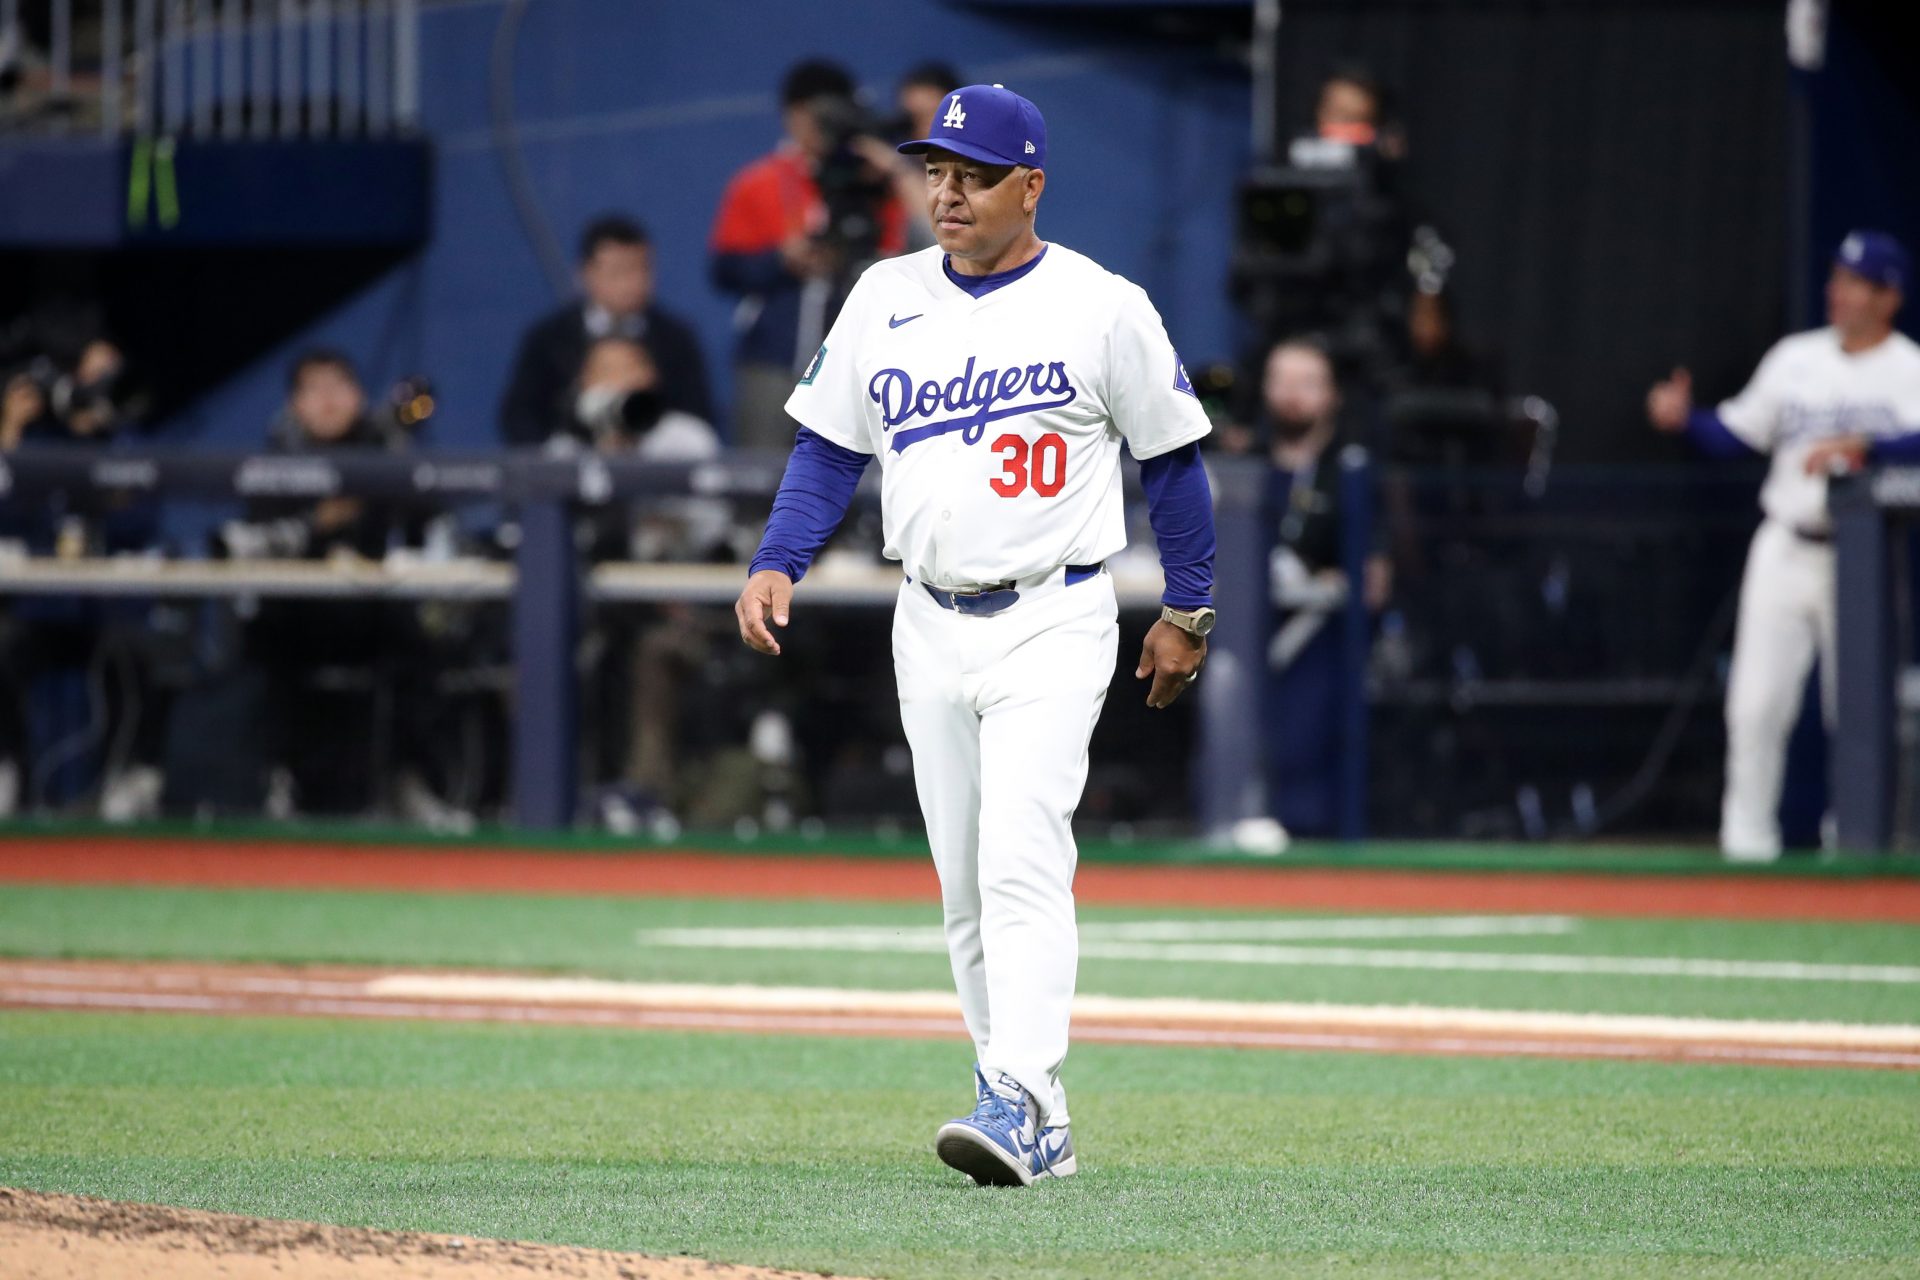 2. Dave Roberts, Los Angeles Dodgers